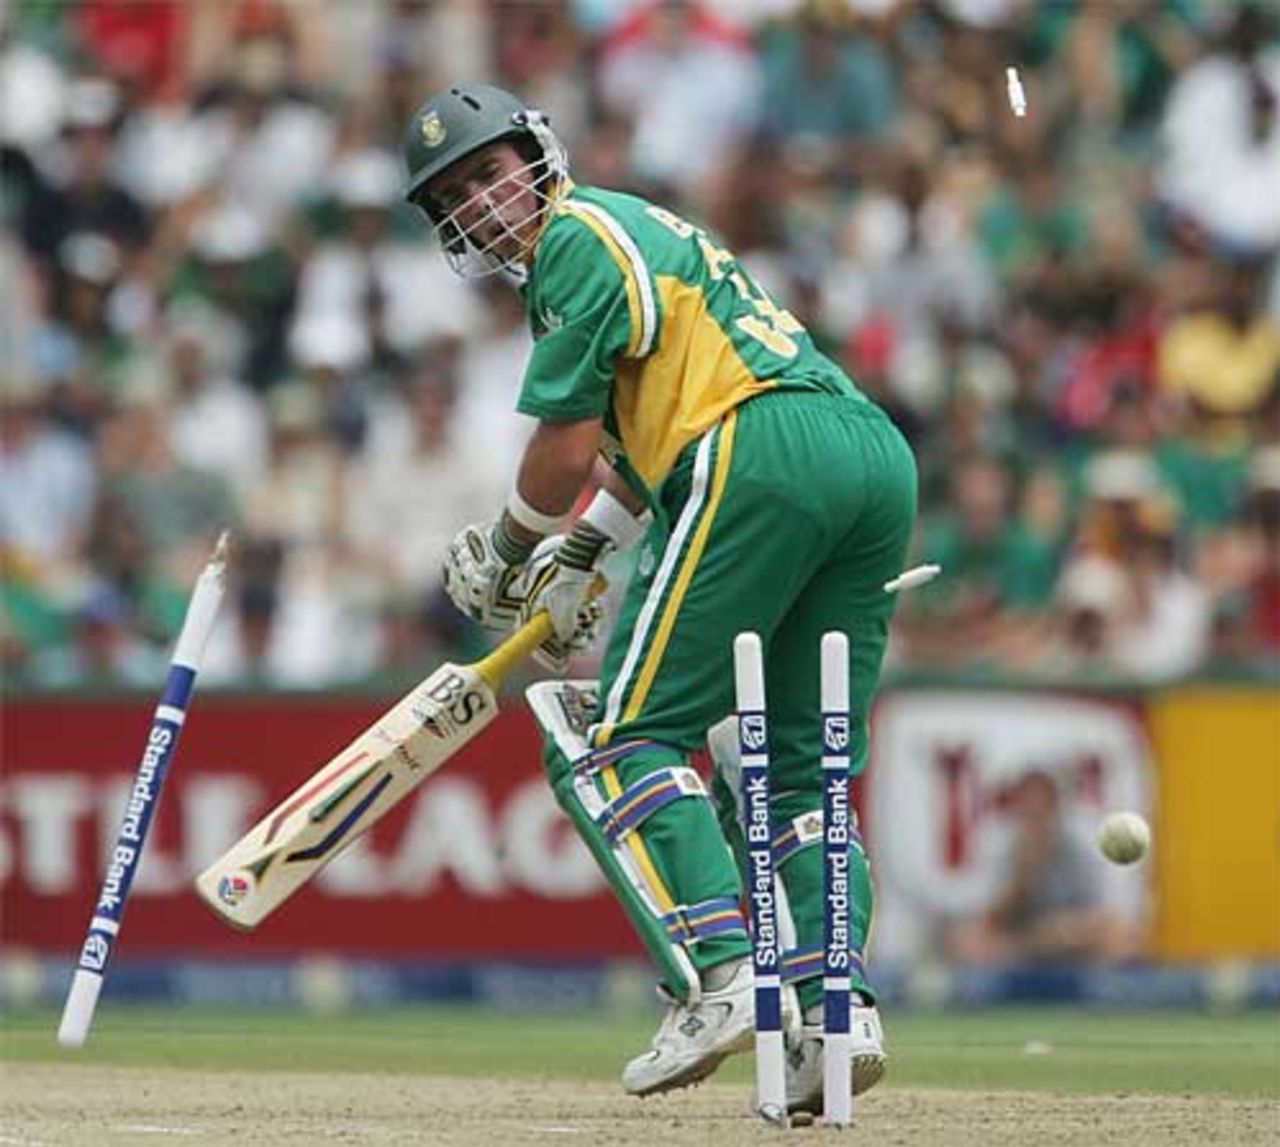 Nicky Boje's stumps fly as he is bowled by Darren Gough, 1st ODI, South Africa v England, The Wanderers, January 30, 2005